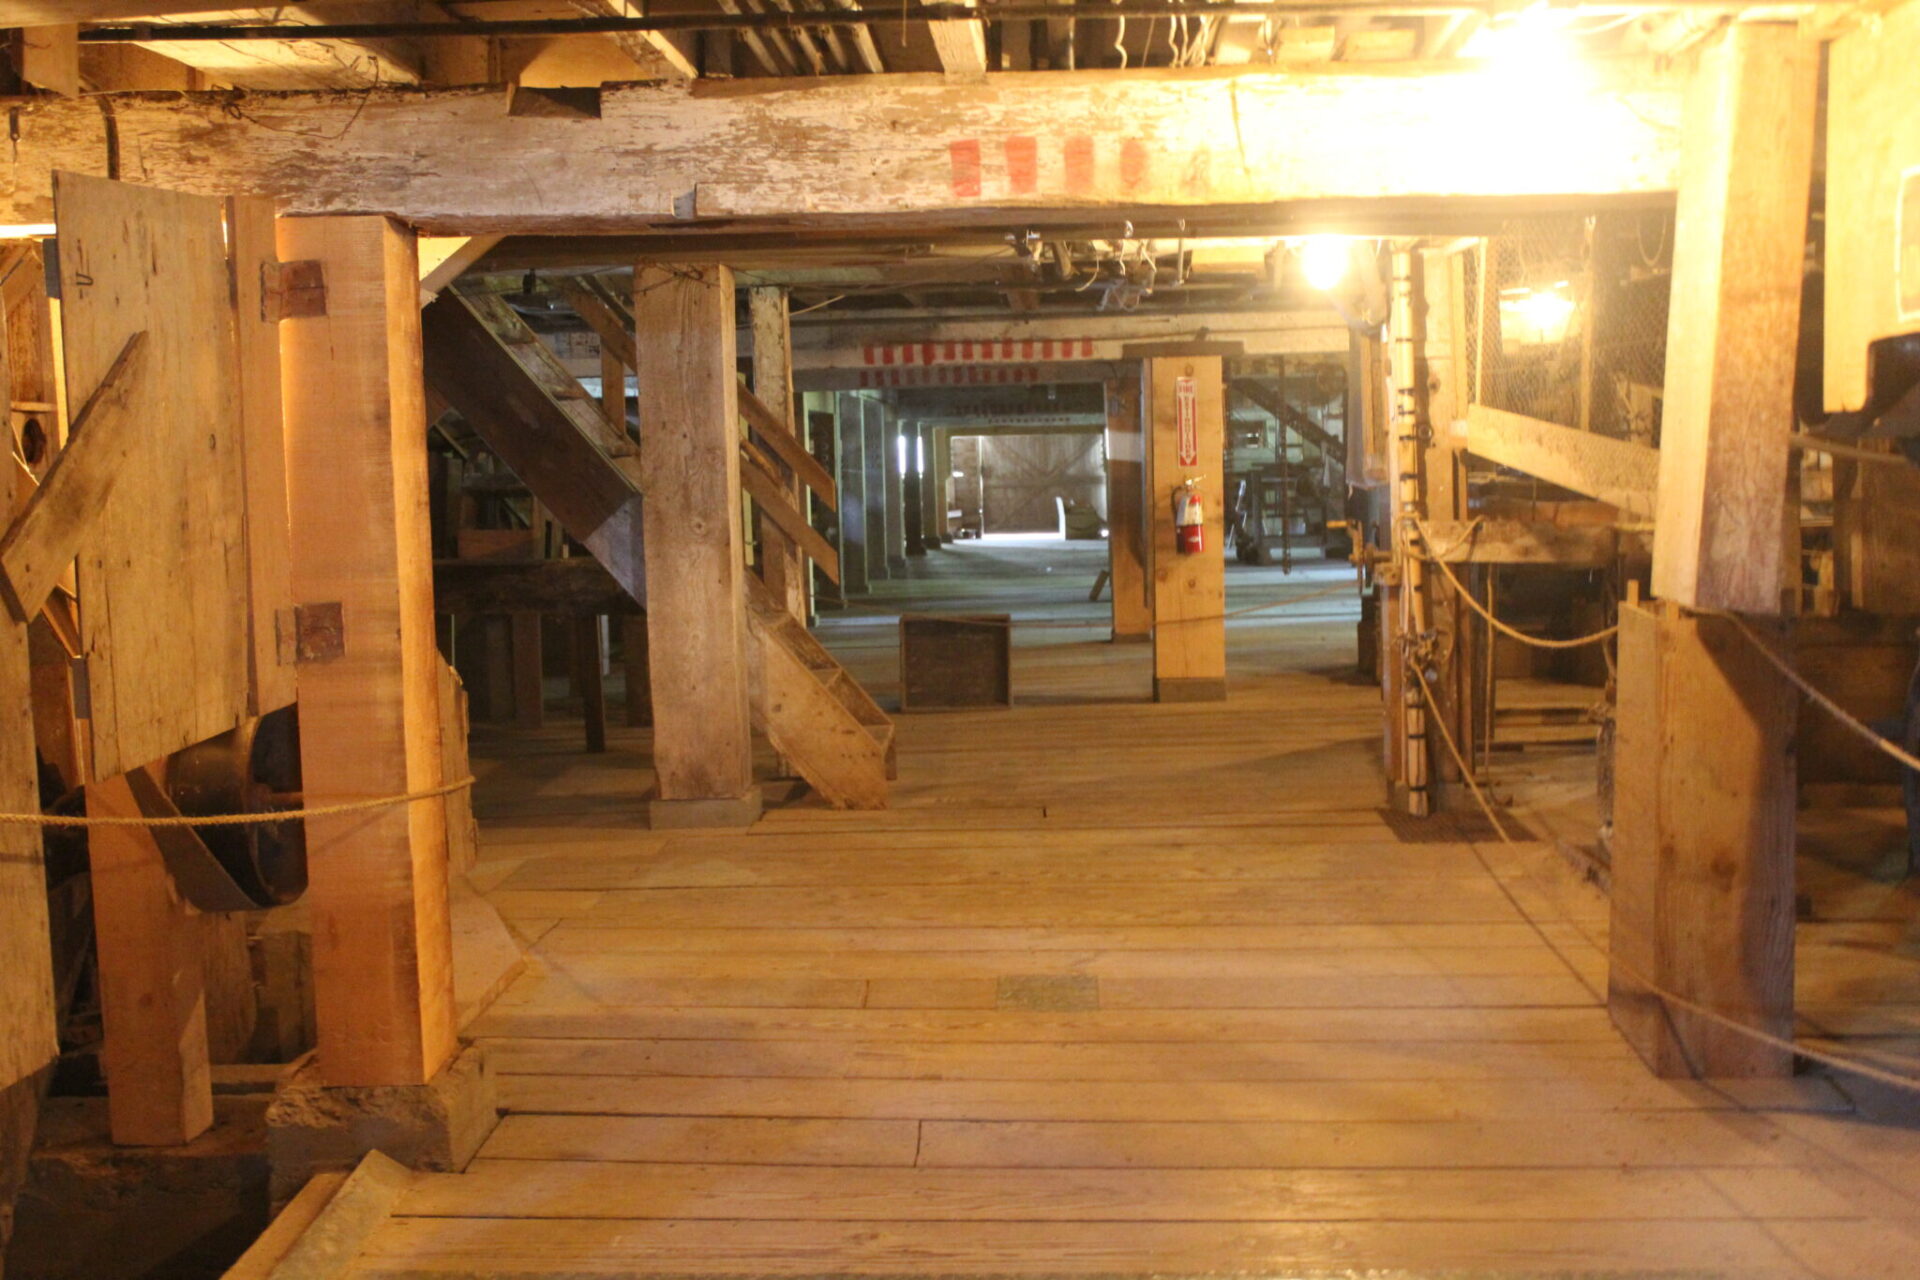 The mill's basement is long and low, but well lit.